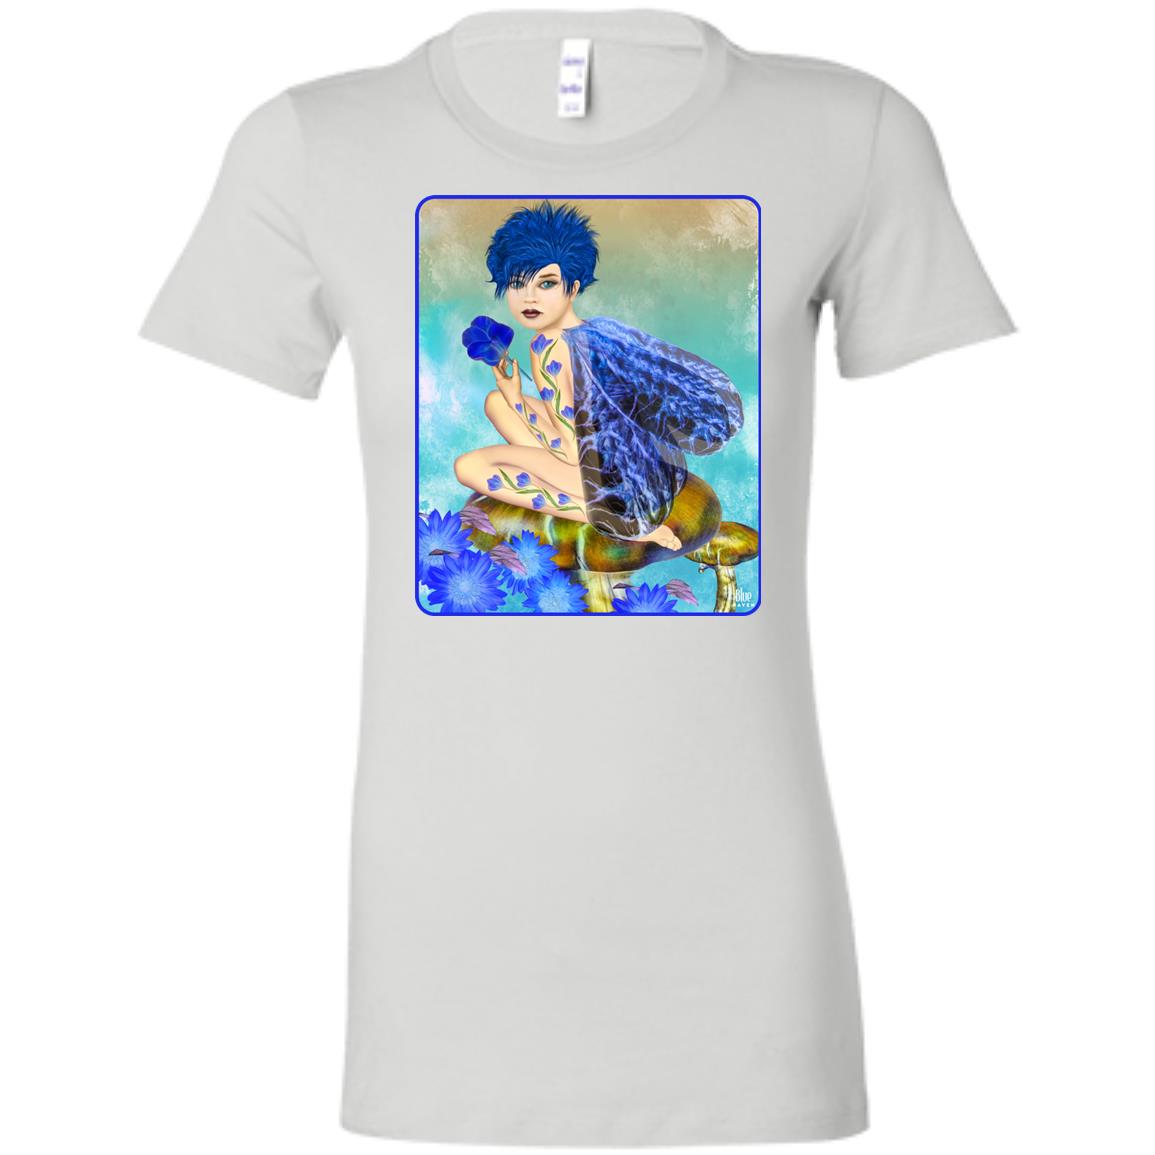 Blue Fairy 2 - Women's Fitted T-Shirt